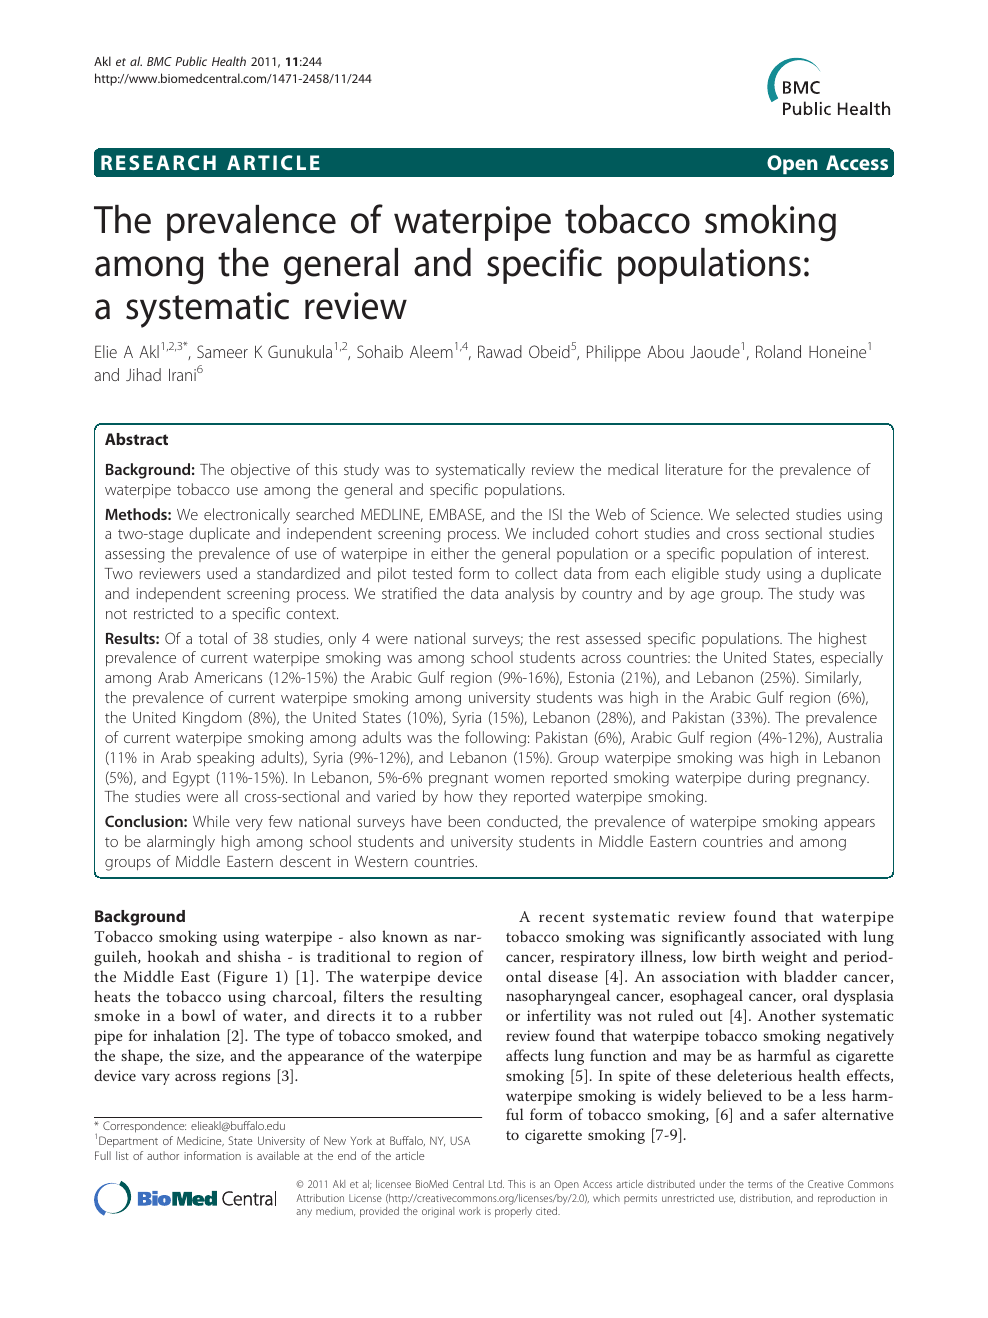 The Prevalence Of Waterpipe Tobacco Smoking Among The General And Specific Populations A Systematic Review Topic Of Research Paper In Health Sciences Download Scholarly Article Pdf And Read For Free On